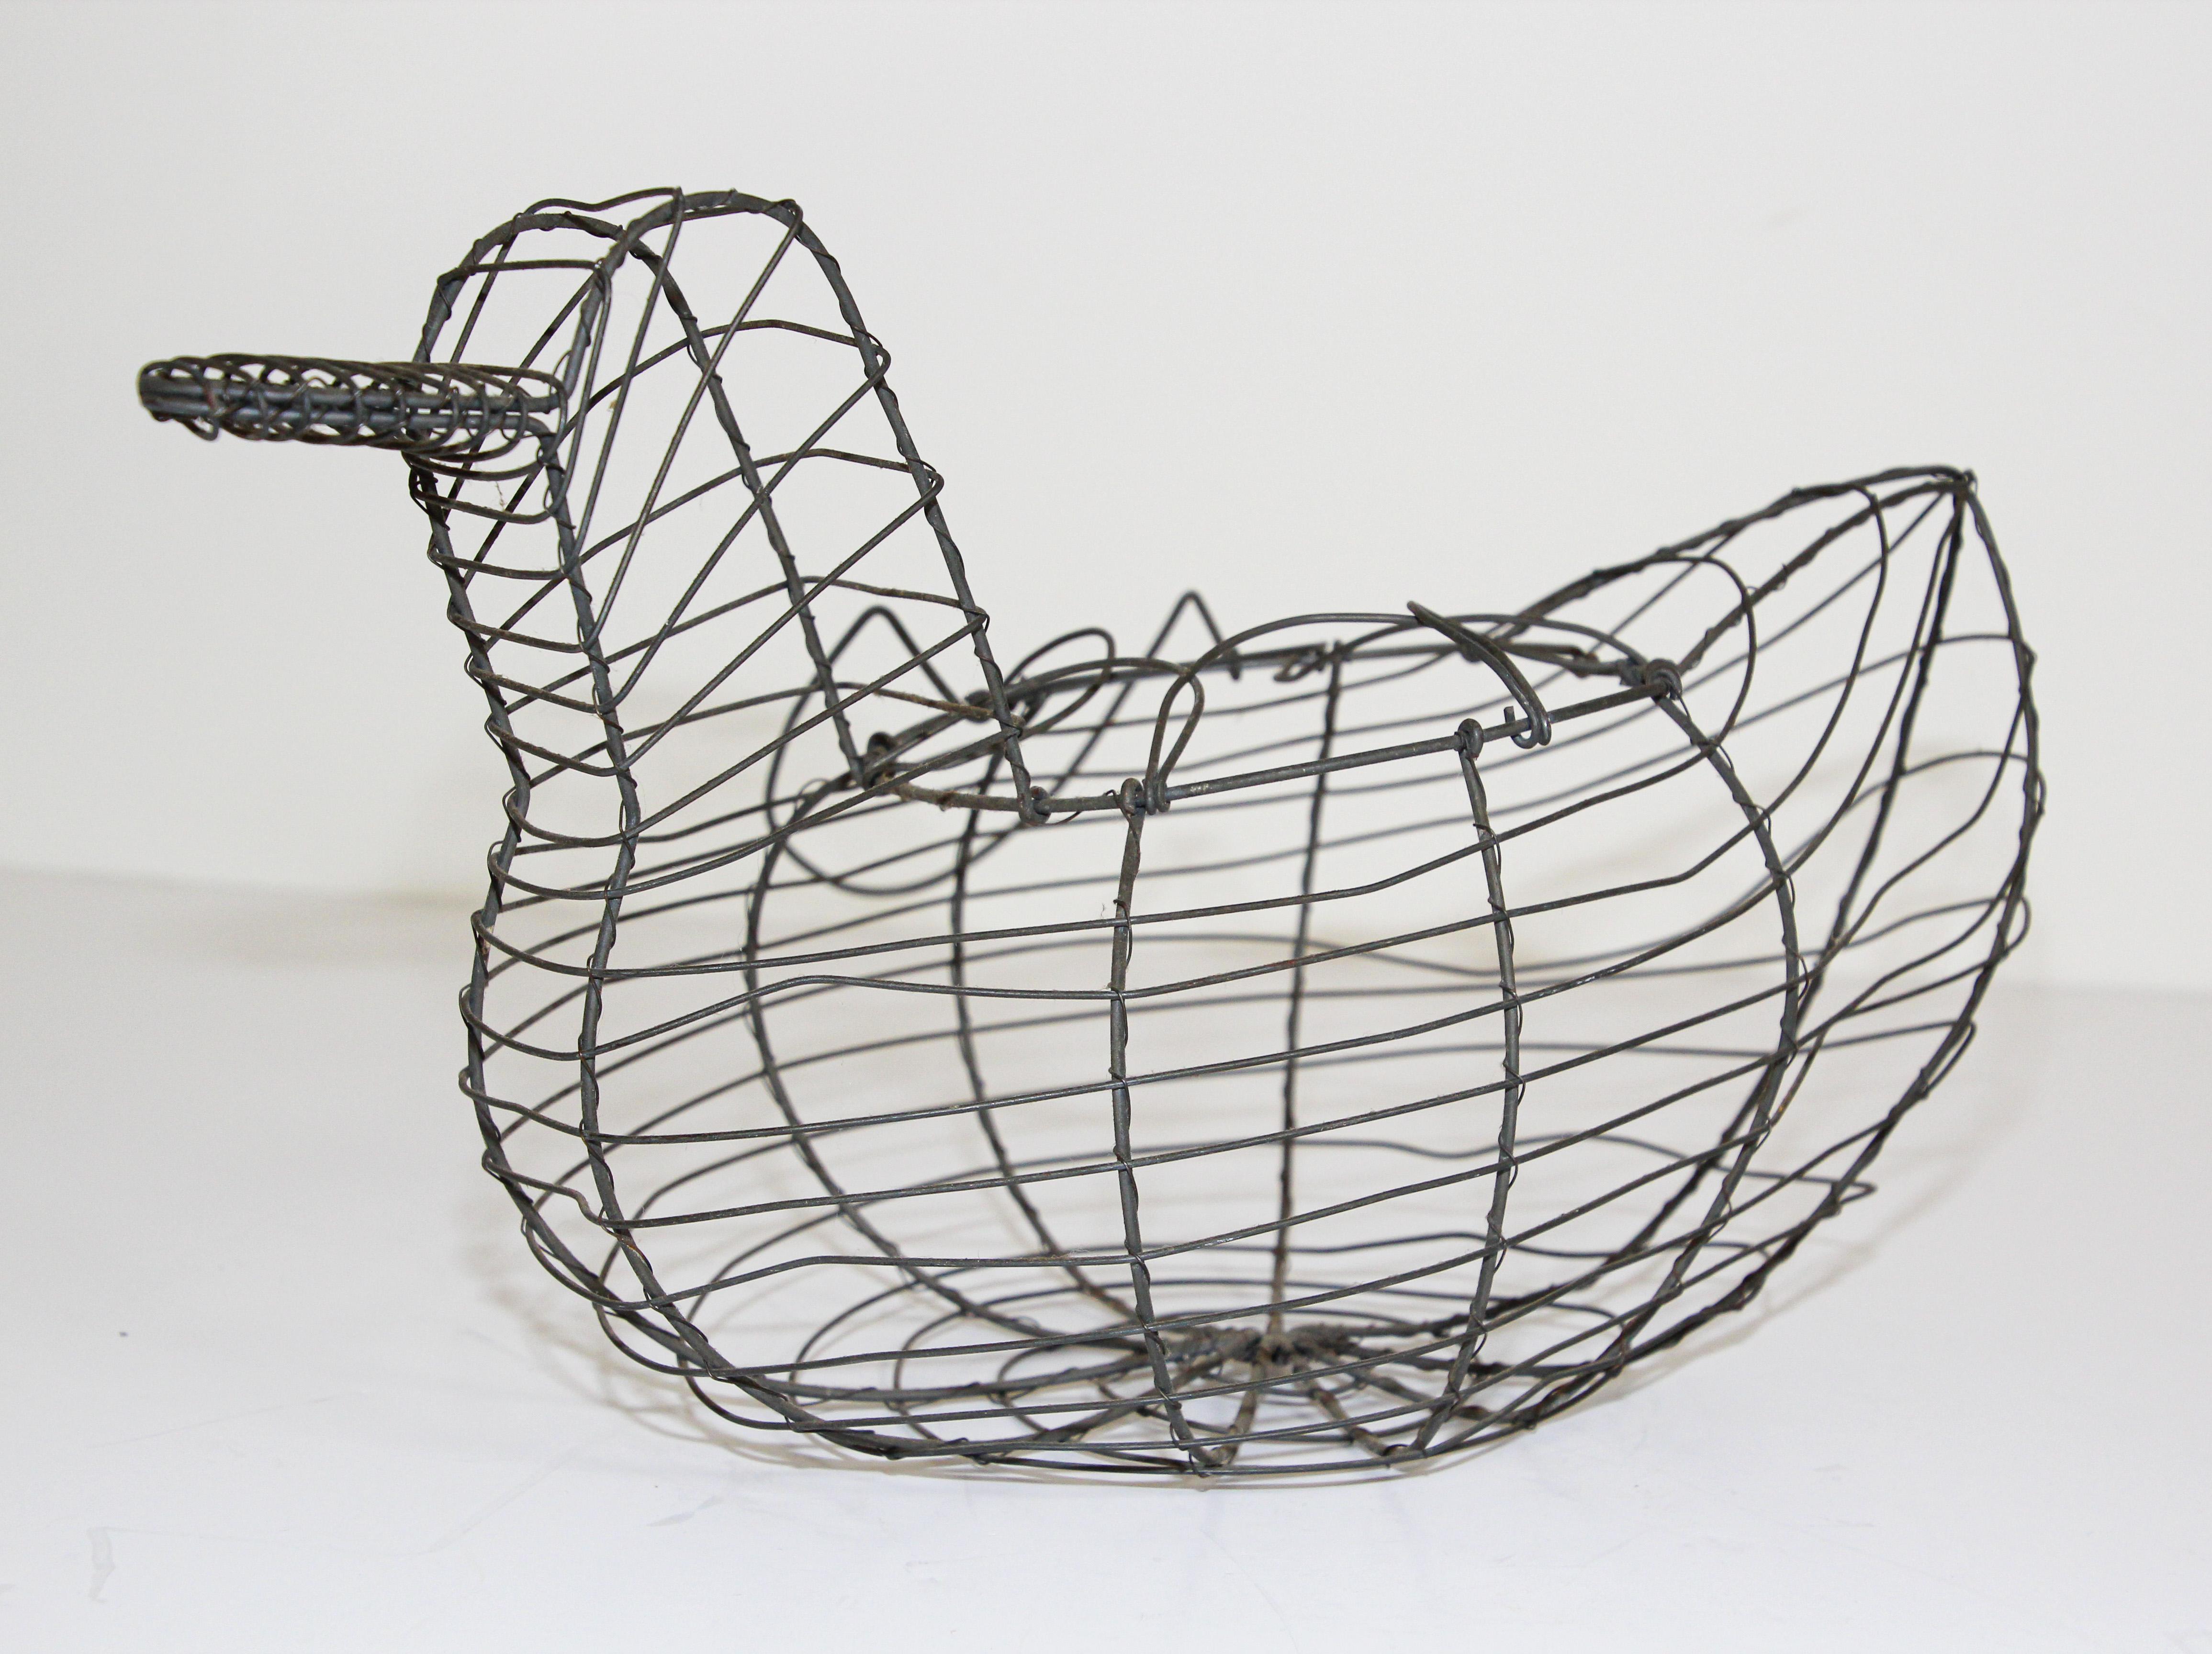 Vintage wire hen shaped egg basket.
Great for displaying farm fresh eggs that don't need refrigeration, all with a touch of farmhouse country flair.
This early little country rustic handle wire basket is in fine condition.
Coiled handle, loop